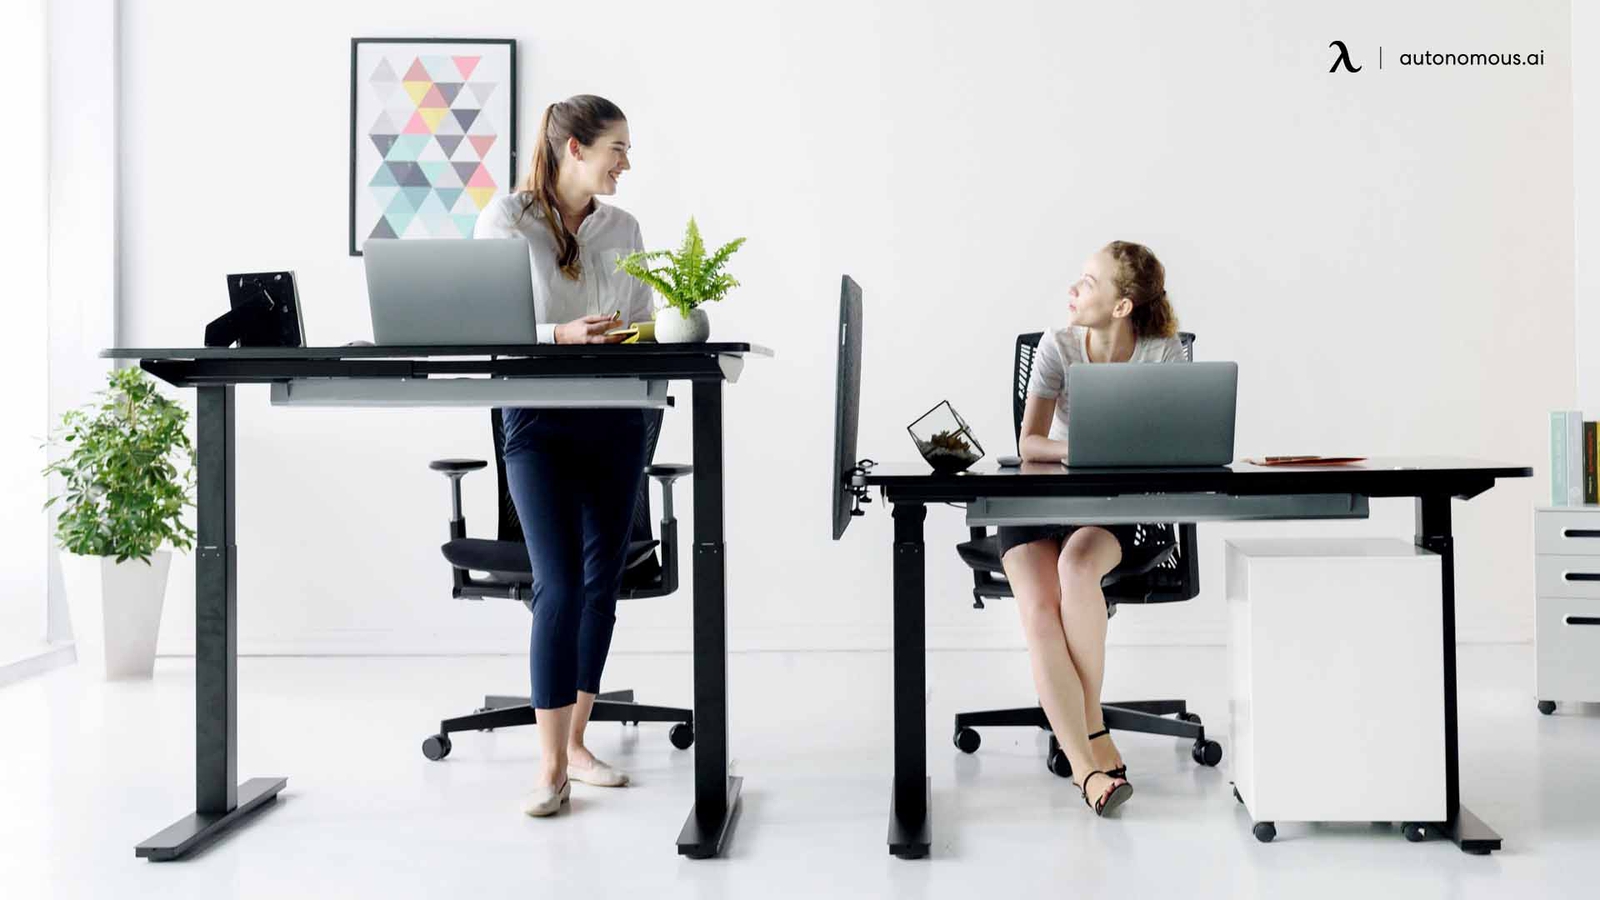 How Tall Should a Standing Desk Be?